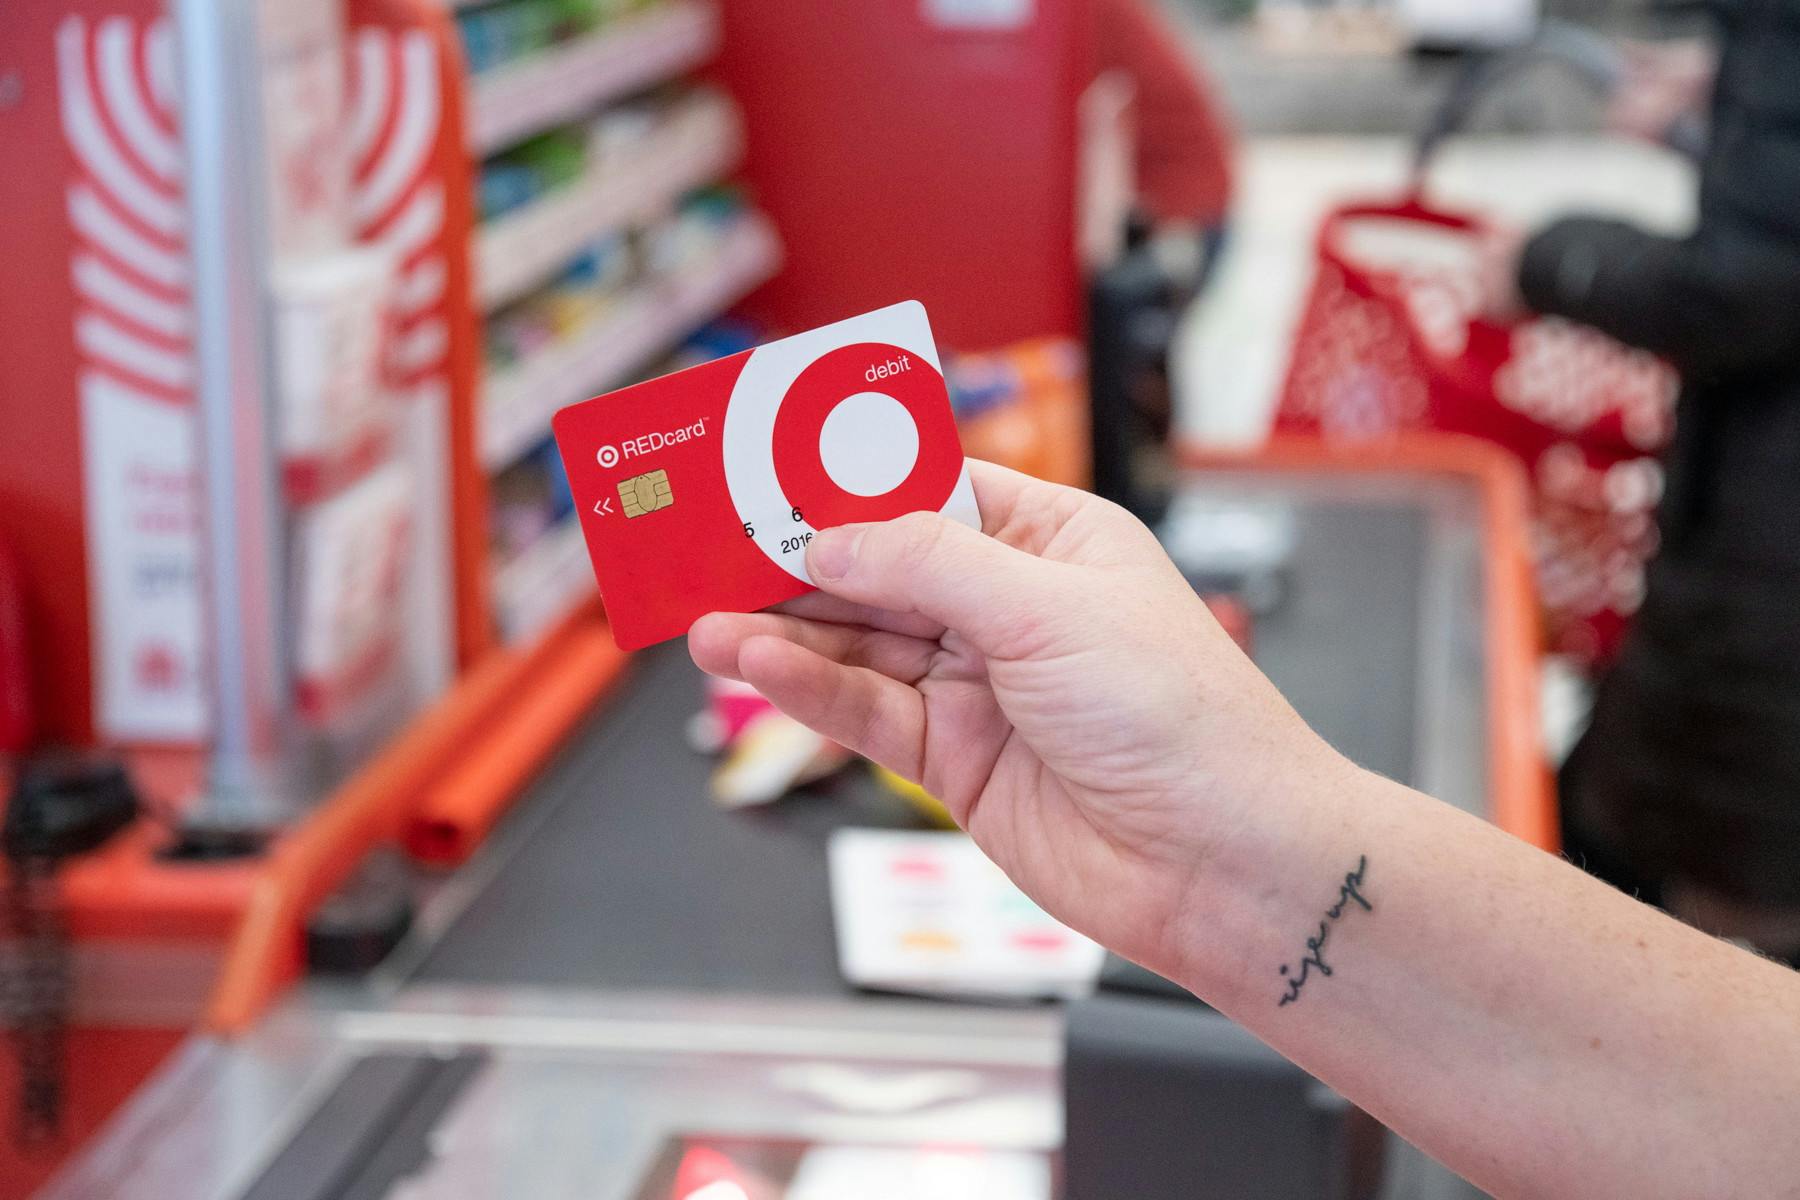 A person's hand holding a Target RedCard up in front of the checkout lane at Target.